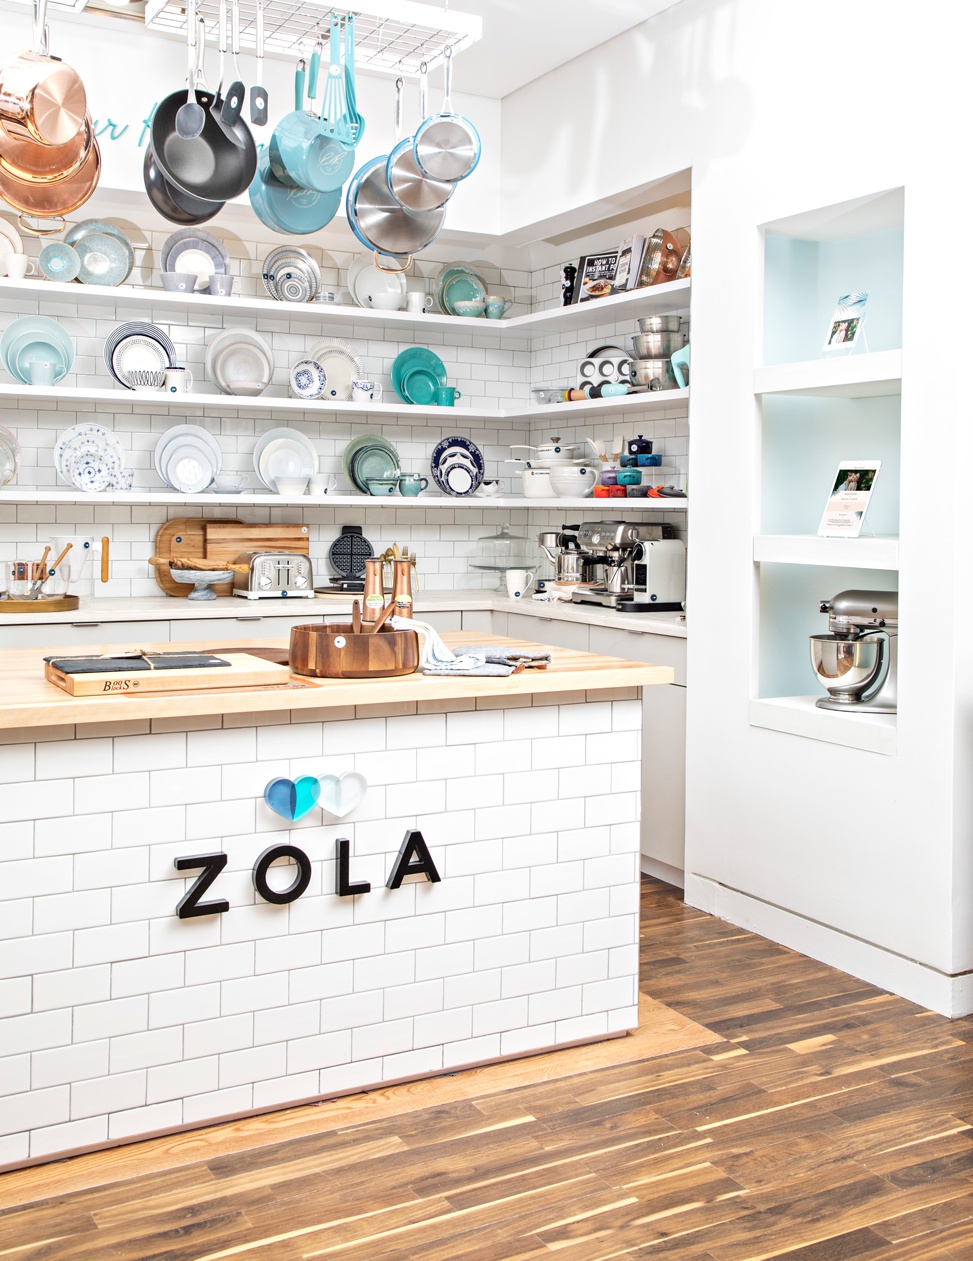 A kitchen full of example plate sets, pots, pans, and other things to put on your wedding registry at the Zola NYC pop-up